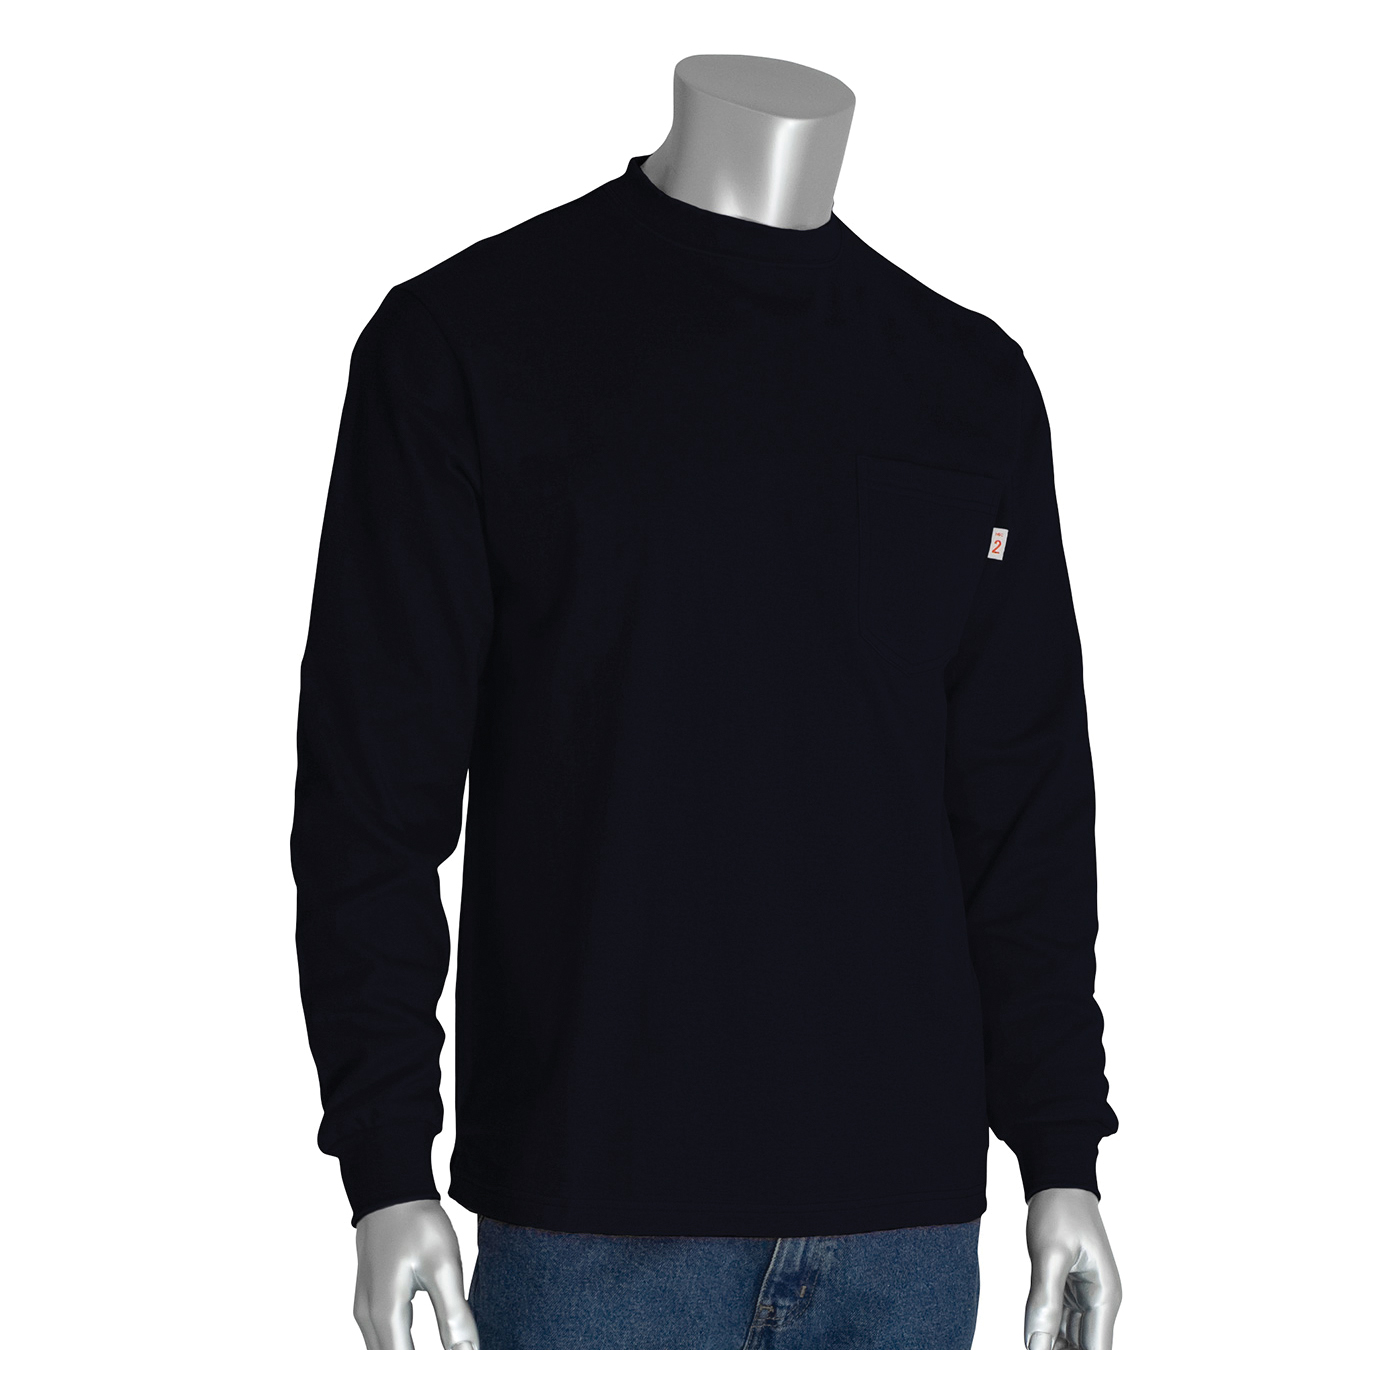 PIP® 385-FRLS-(NV)-M Arc and Flame-Resistant Long Sleeve T-Shirt, M, Navy, Cotton Interlock Knit, 31 in L